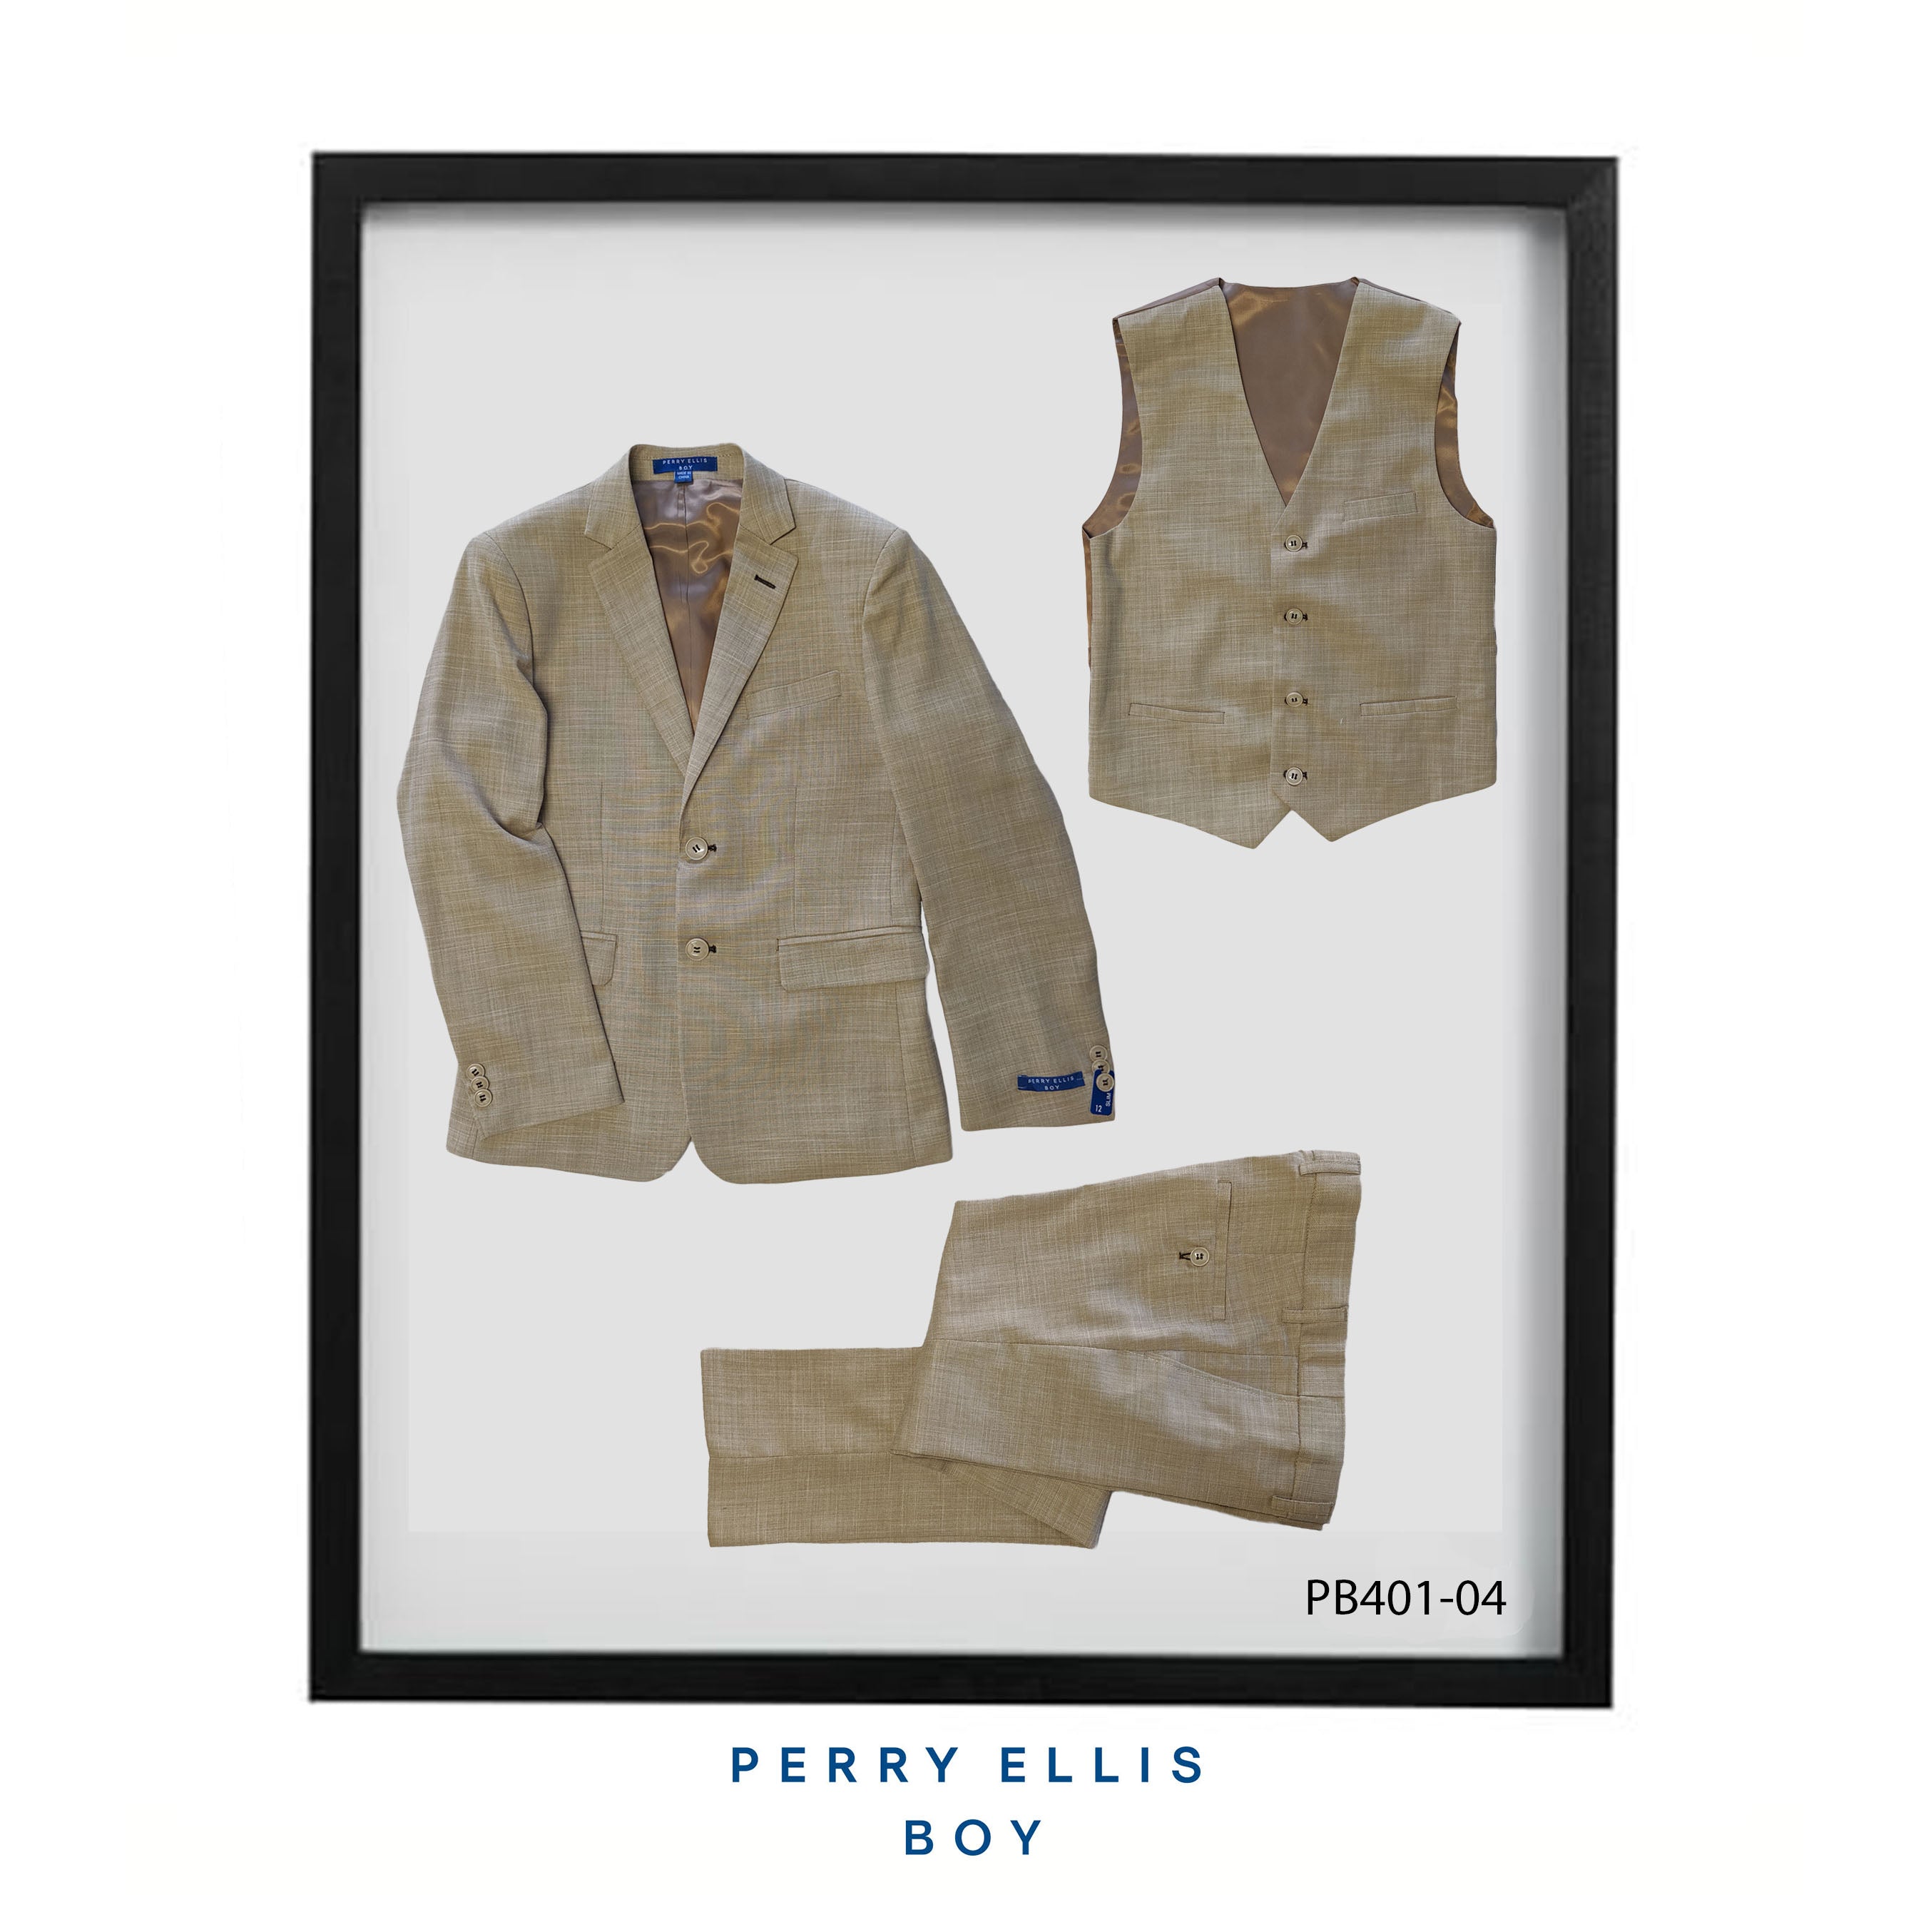 Beige 3 Piece Perry Ellis Textured Suits For Boys PB401-04